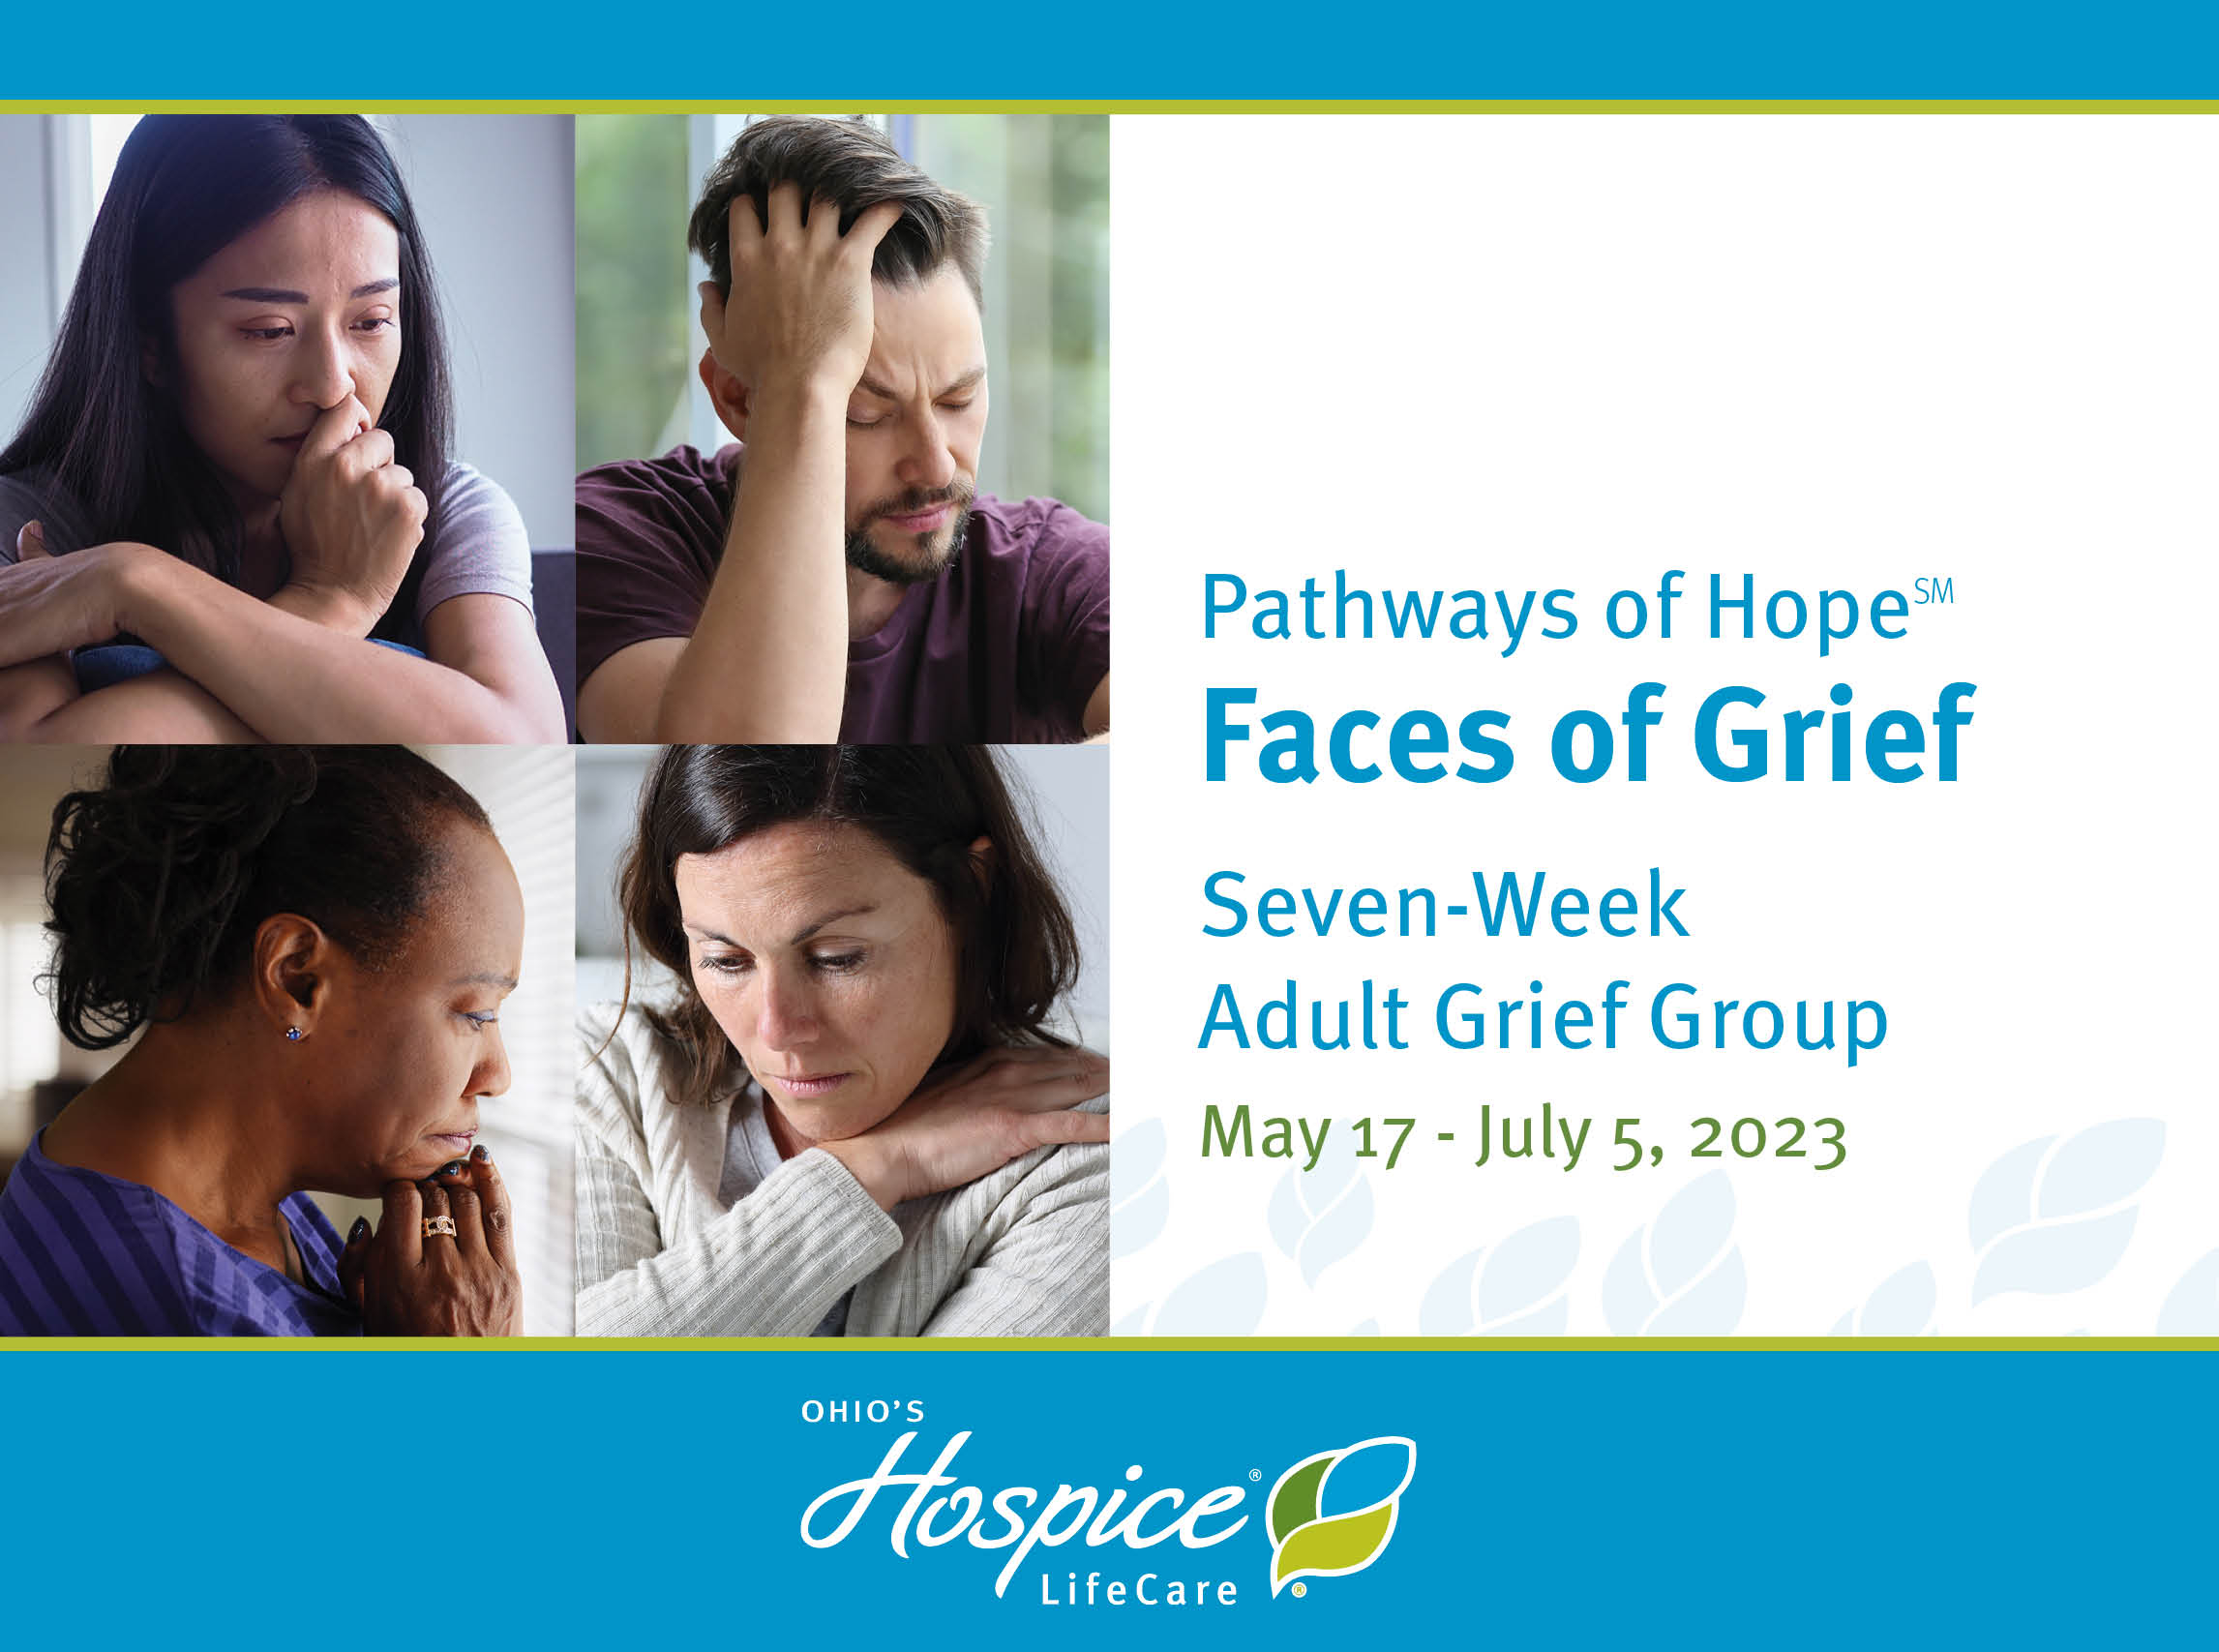 Pathways of Hope. Faces of Grief. Seven-Week Adult Grief Group. May 17 - July 5, 2023